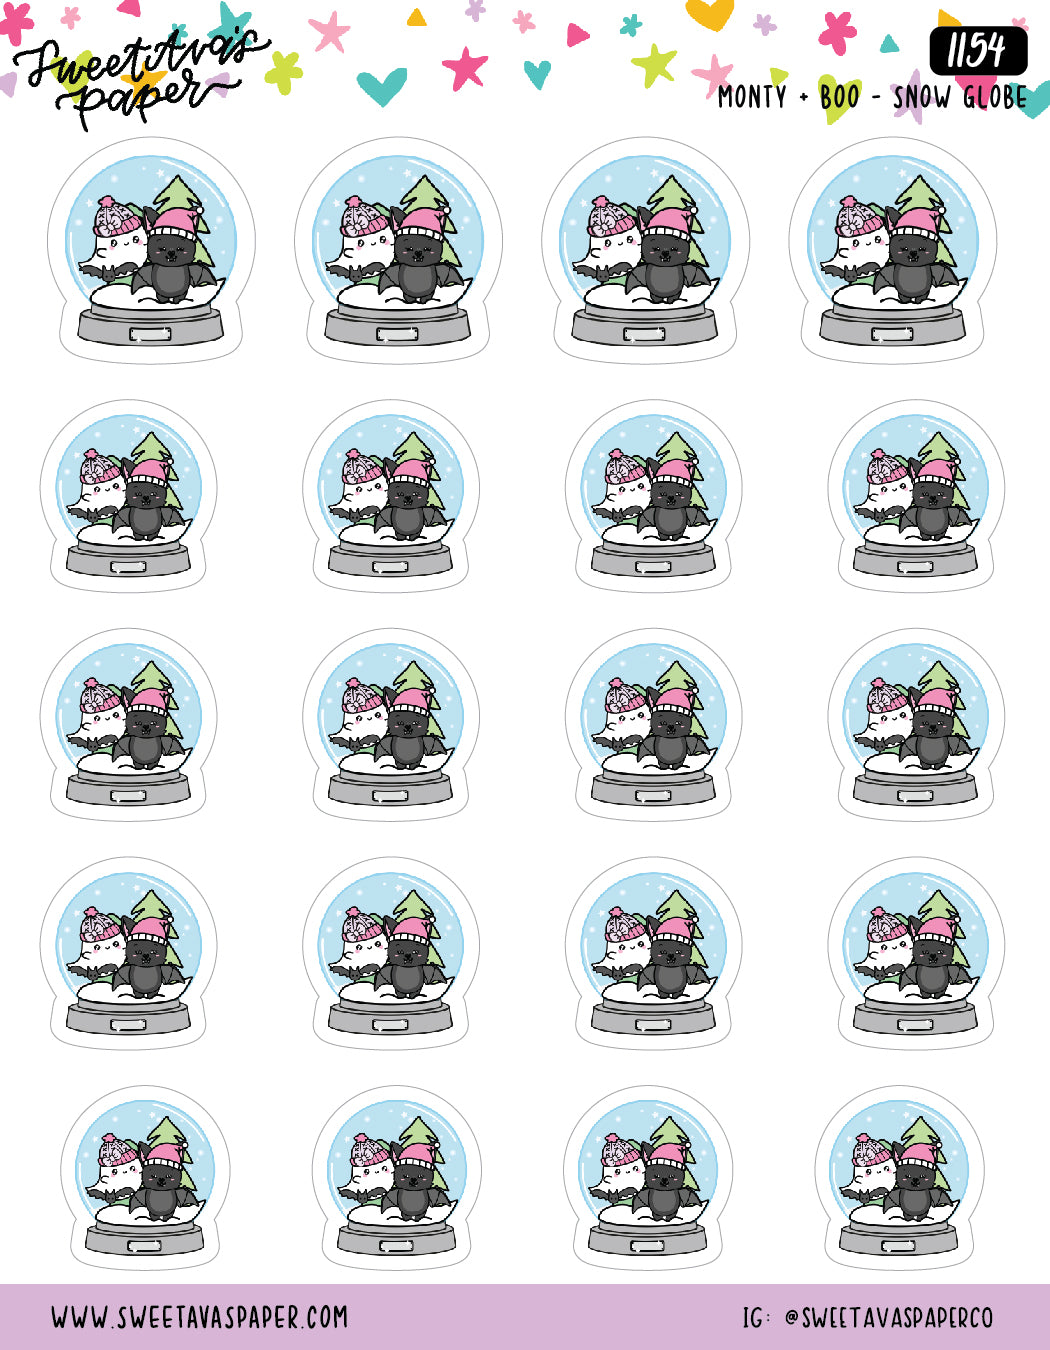 Winter Snow Globe Planner Stickers - Monty The Bat and Boo and Lunar - [1154]